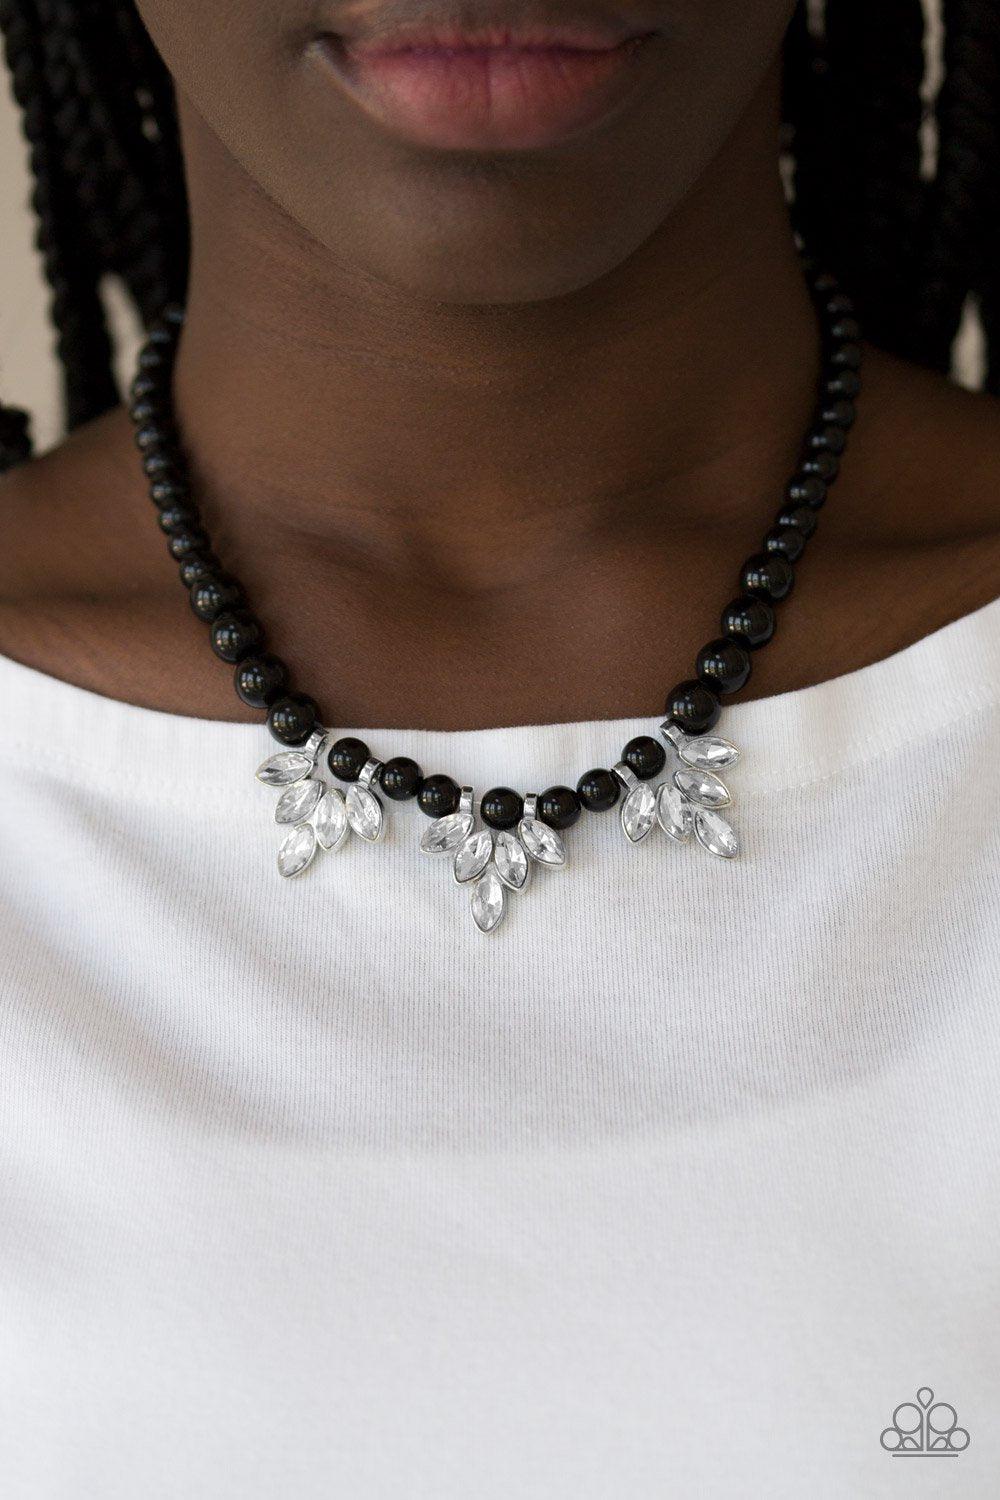 Society Socialite Black Pearl Necklace - Paparazzi Accessories-CarasShop.com - $5 Jewelry by Cara Jewels